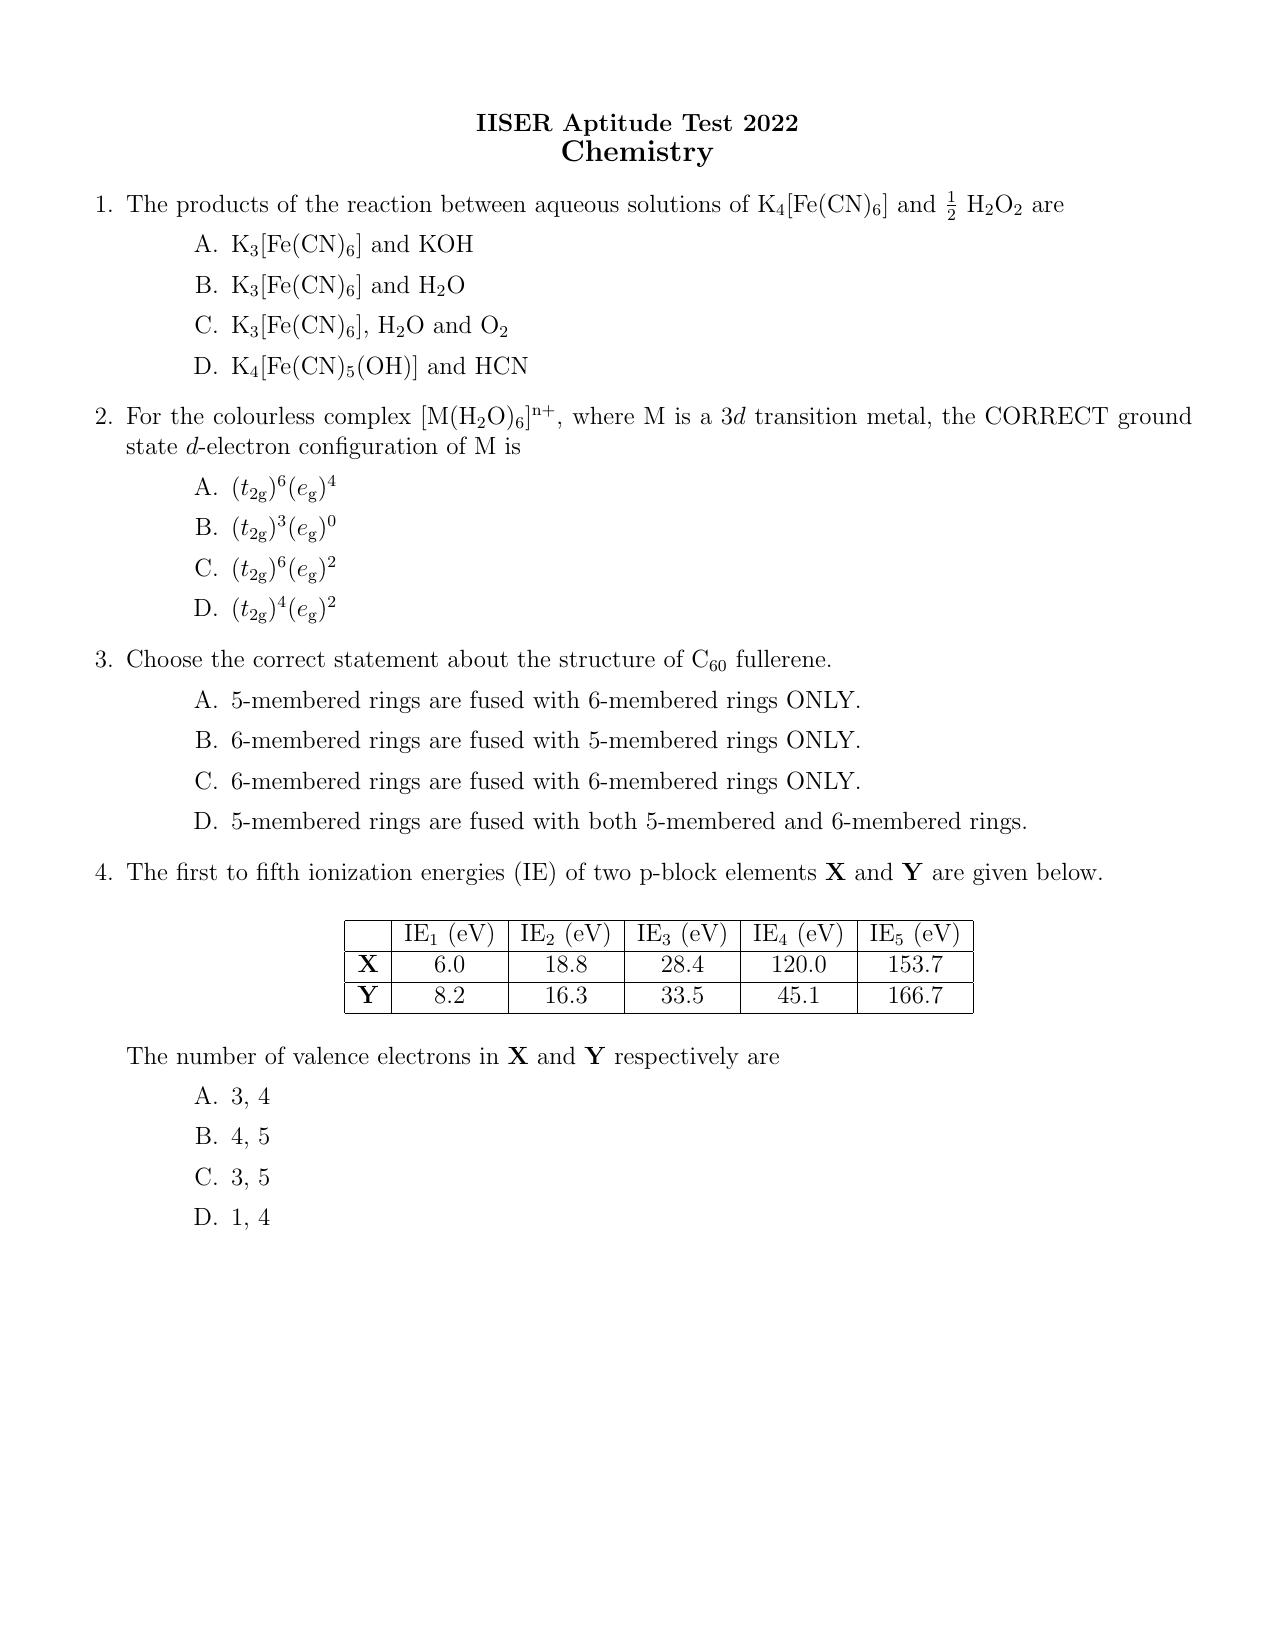 IISER Aptitude Test 2022 English Question Paper - Page 5